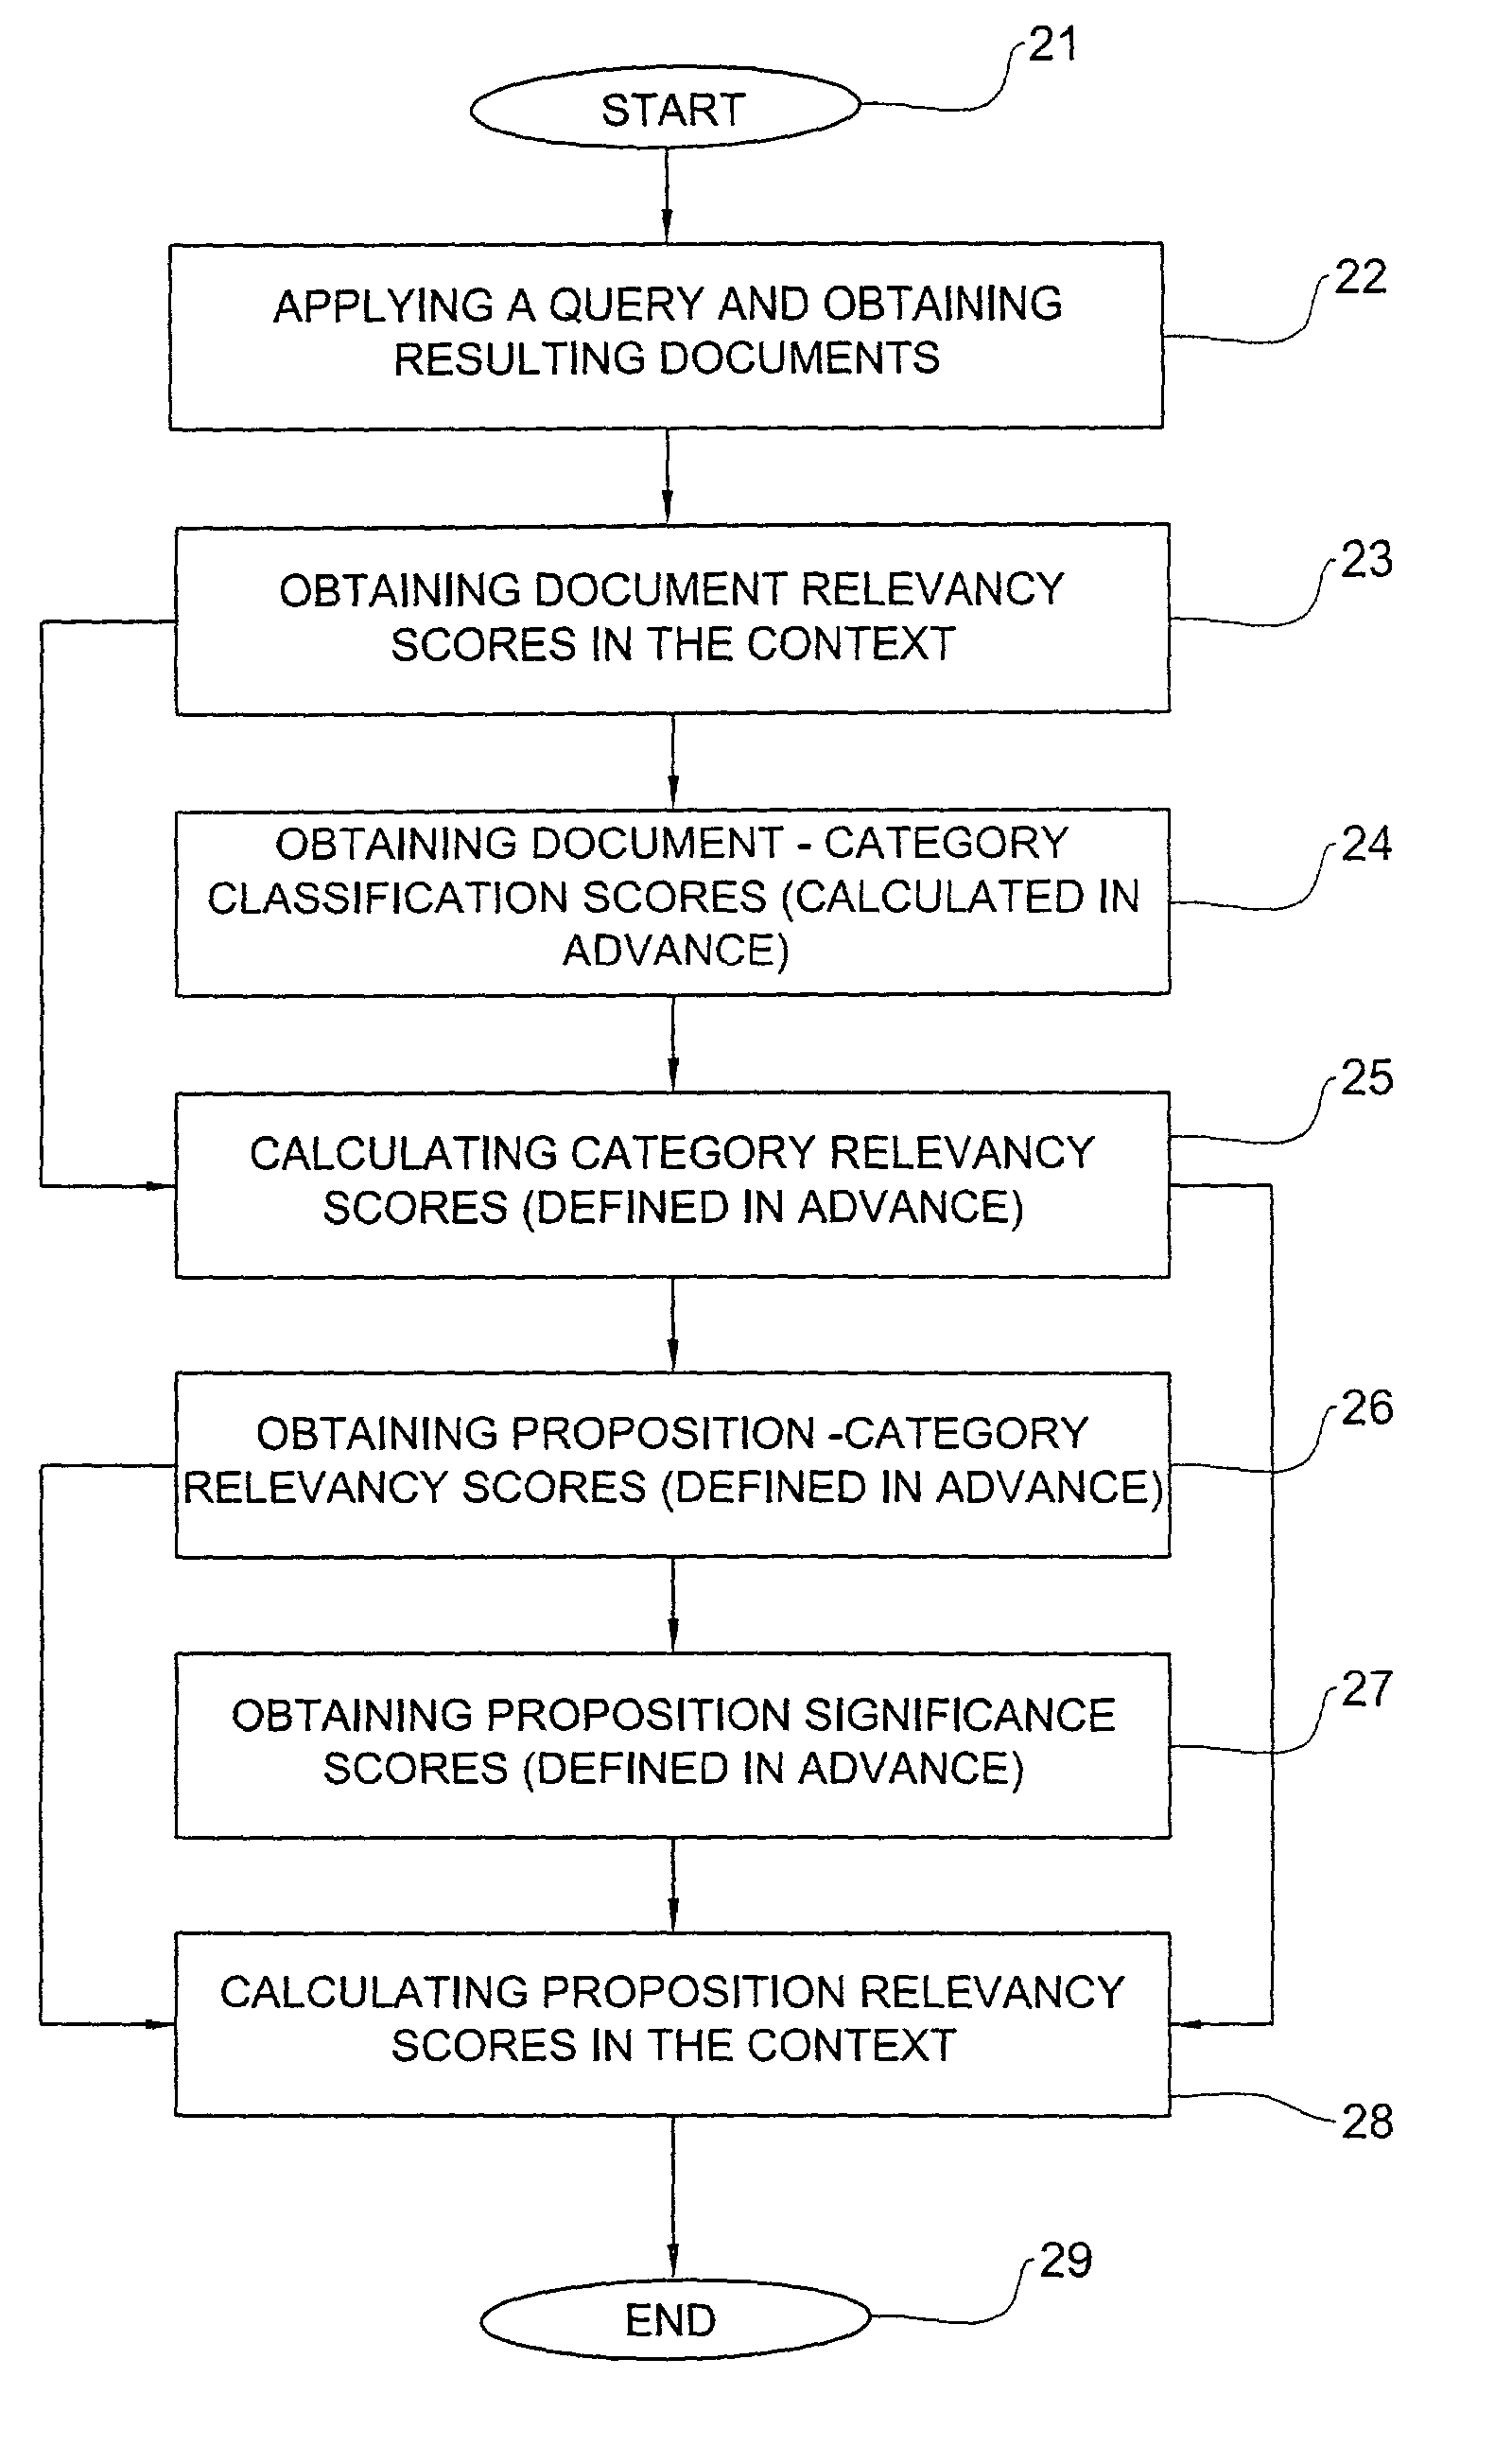 Category-based selections in an information access environment